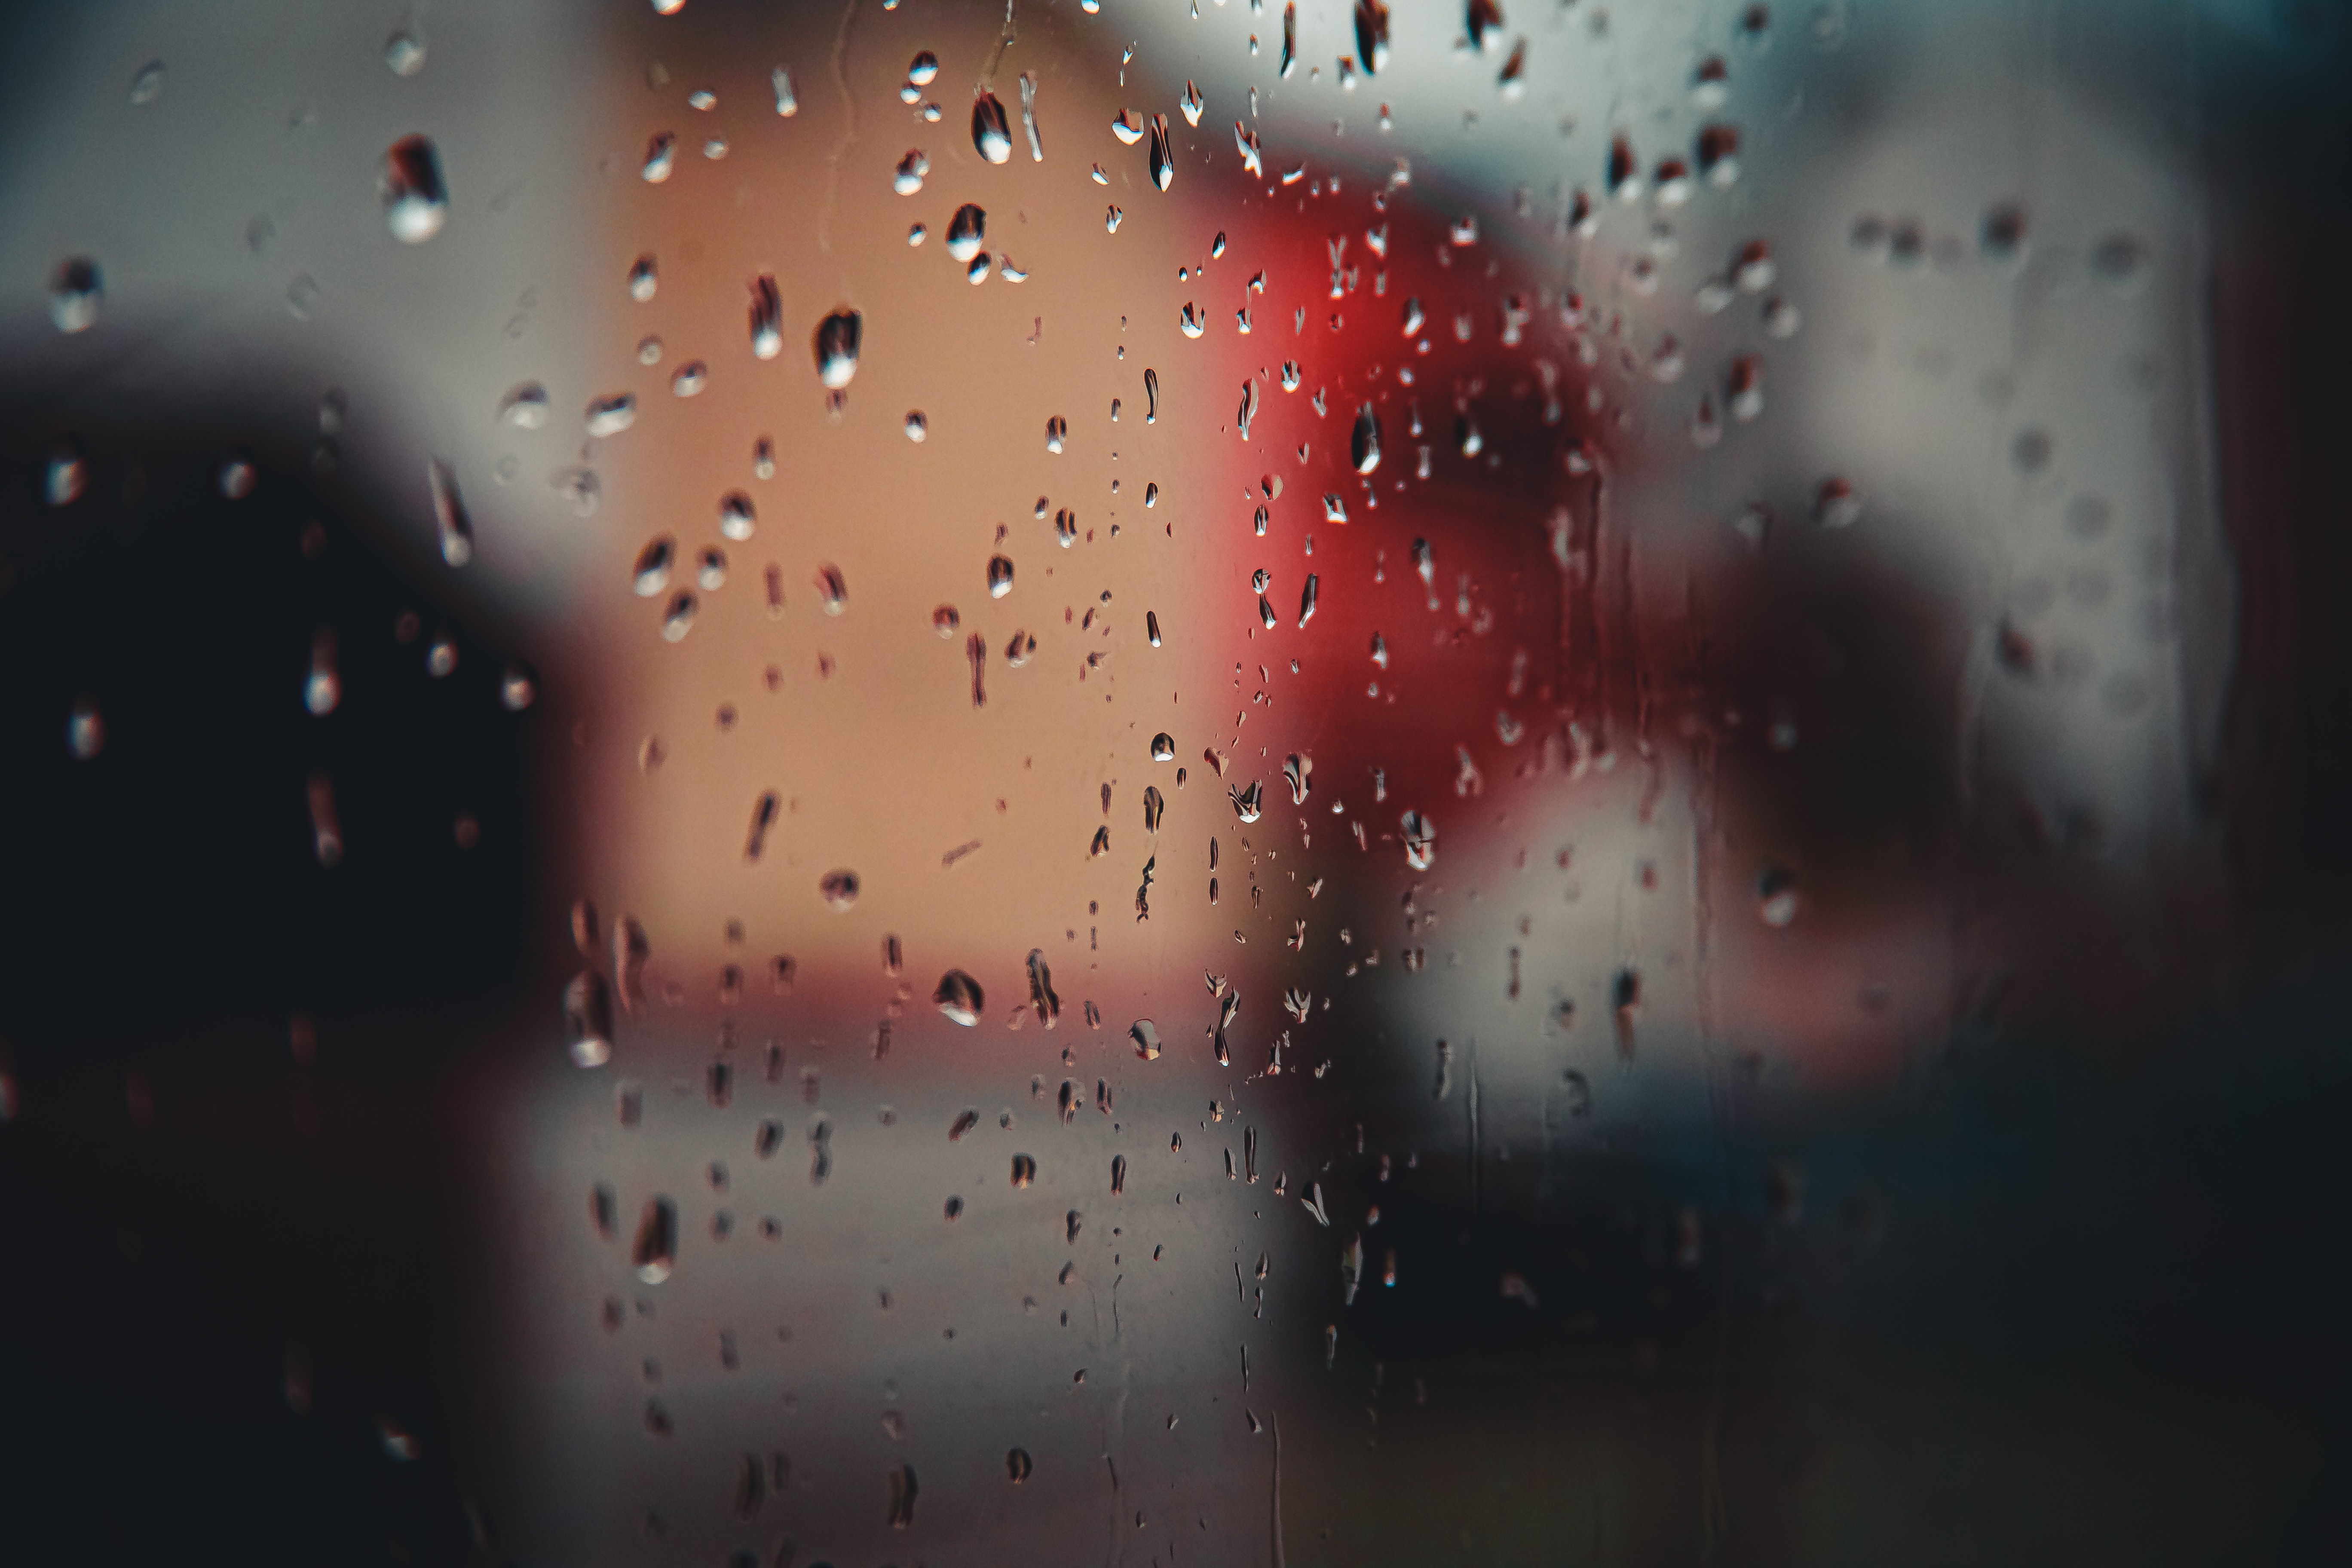 97049 download wallpaper glass, rain, drops, miscellanea, miscellaneous, blurred, fuzzy screensavers and pictures for free